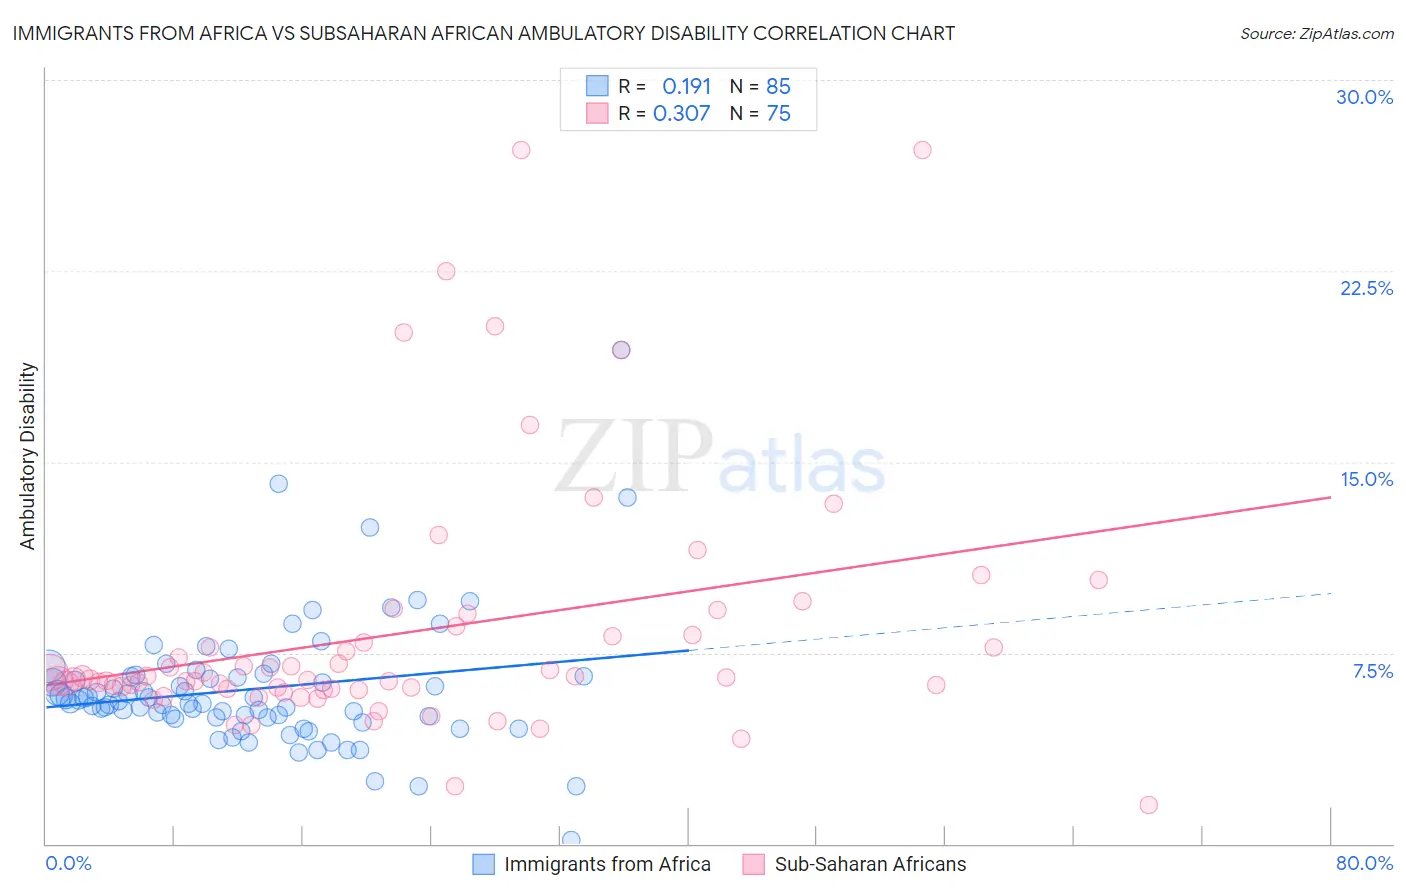 Immigrants from Africa vs Subsaharan African Ambulatory Disability